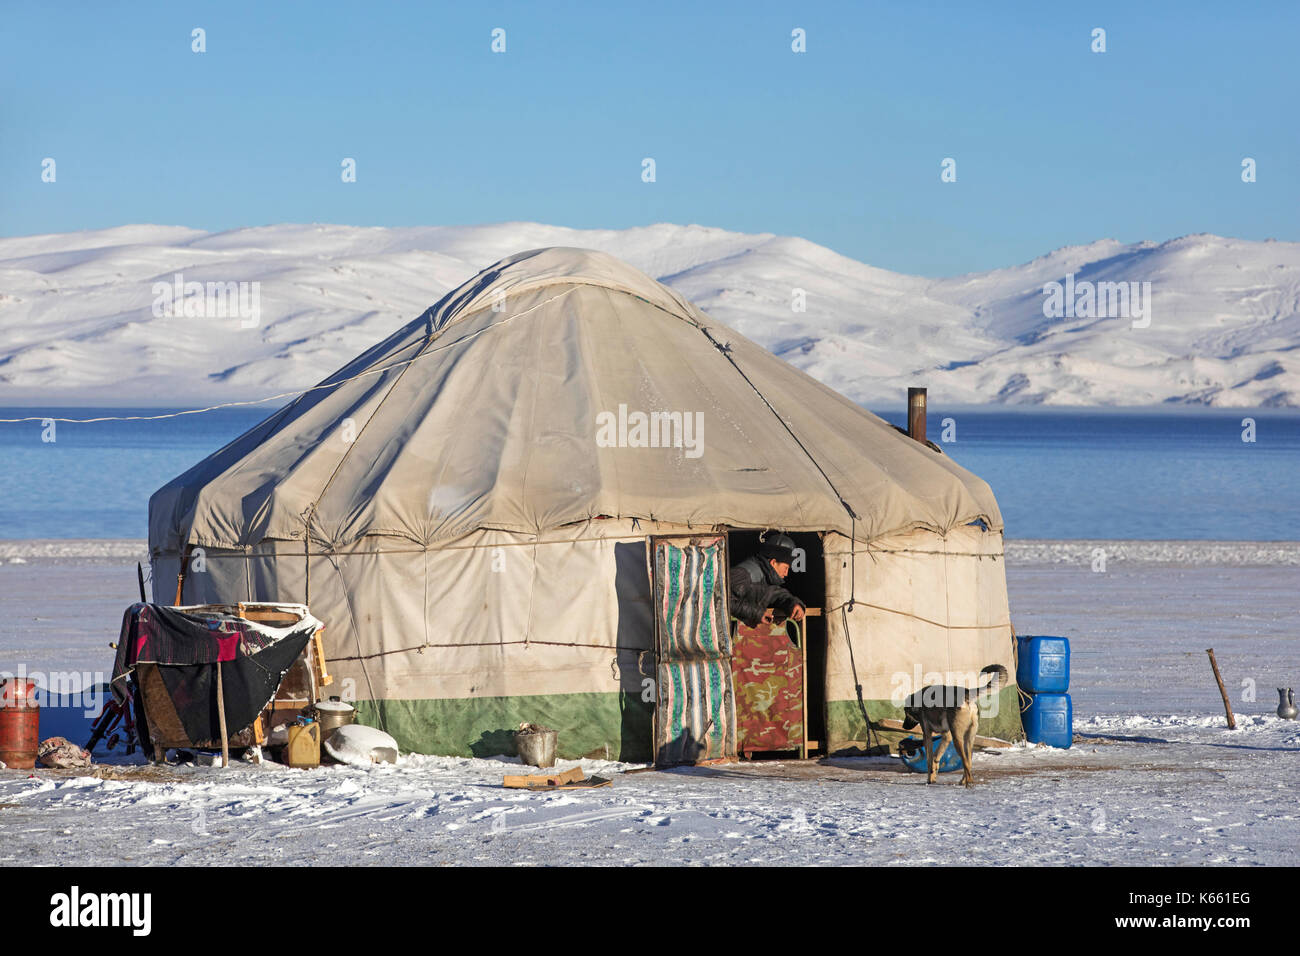 Kyrgyz man in door opening of traditional yurt in the snow along Song Kul / Song Kol lake in the Tian Shan Mountains, Naryn Province, Kyrgyzstan Stock Photo